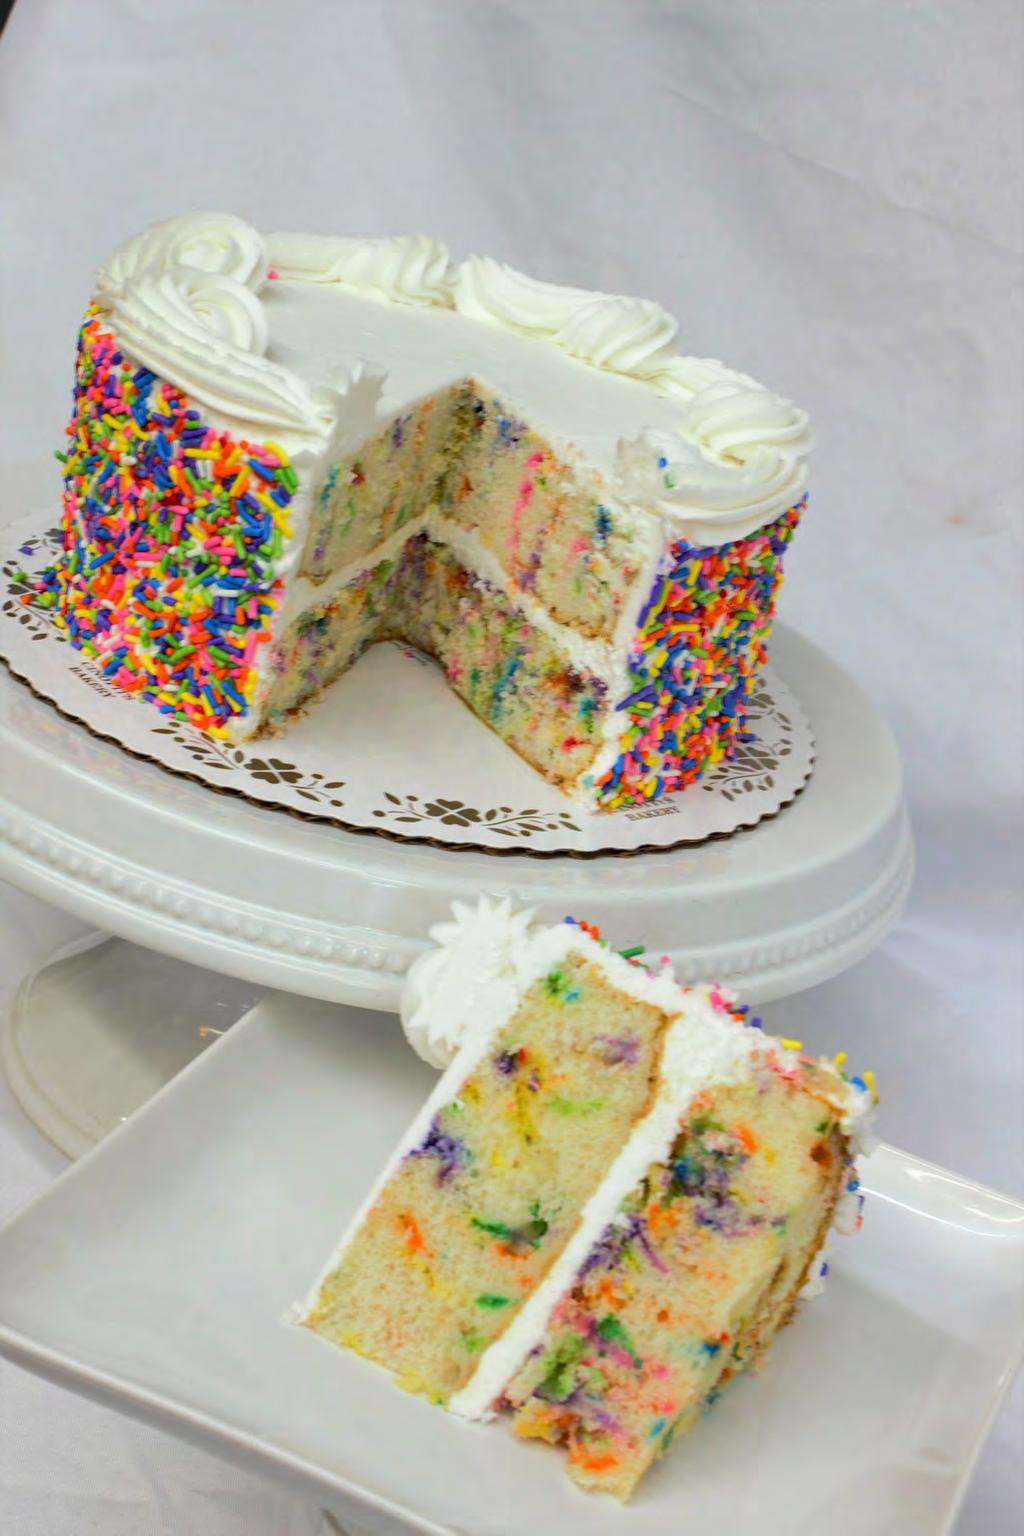 Topped with our homemade Buttercream and rolled in colorful sprinkles.